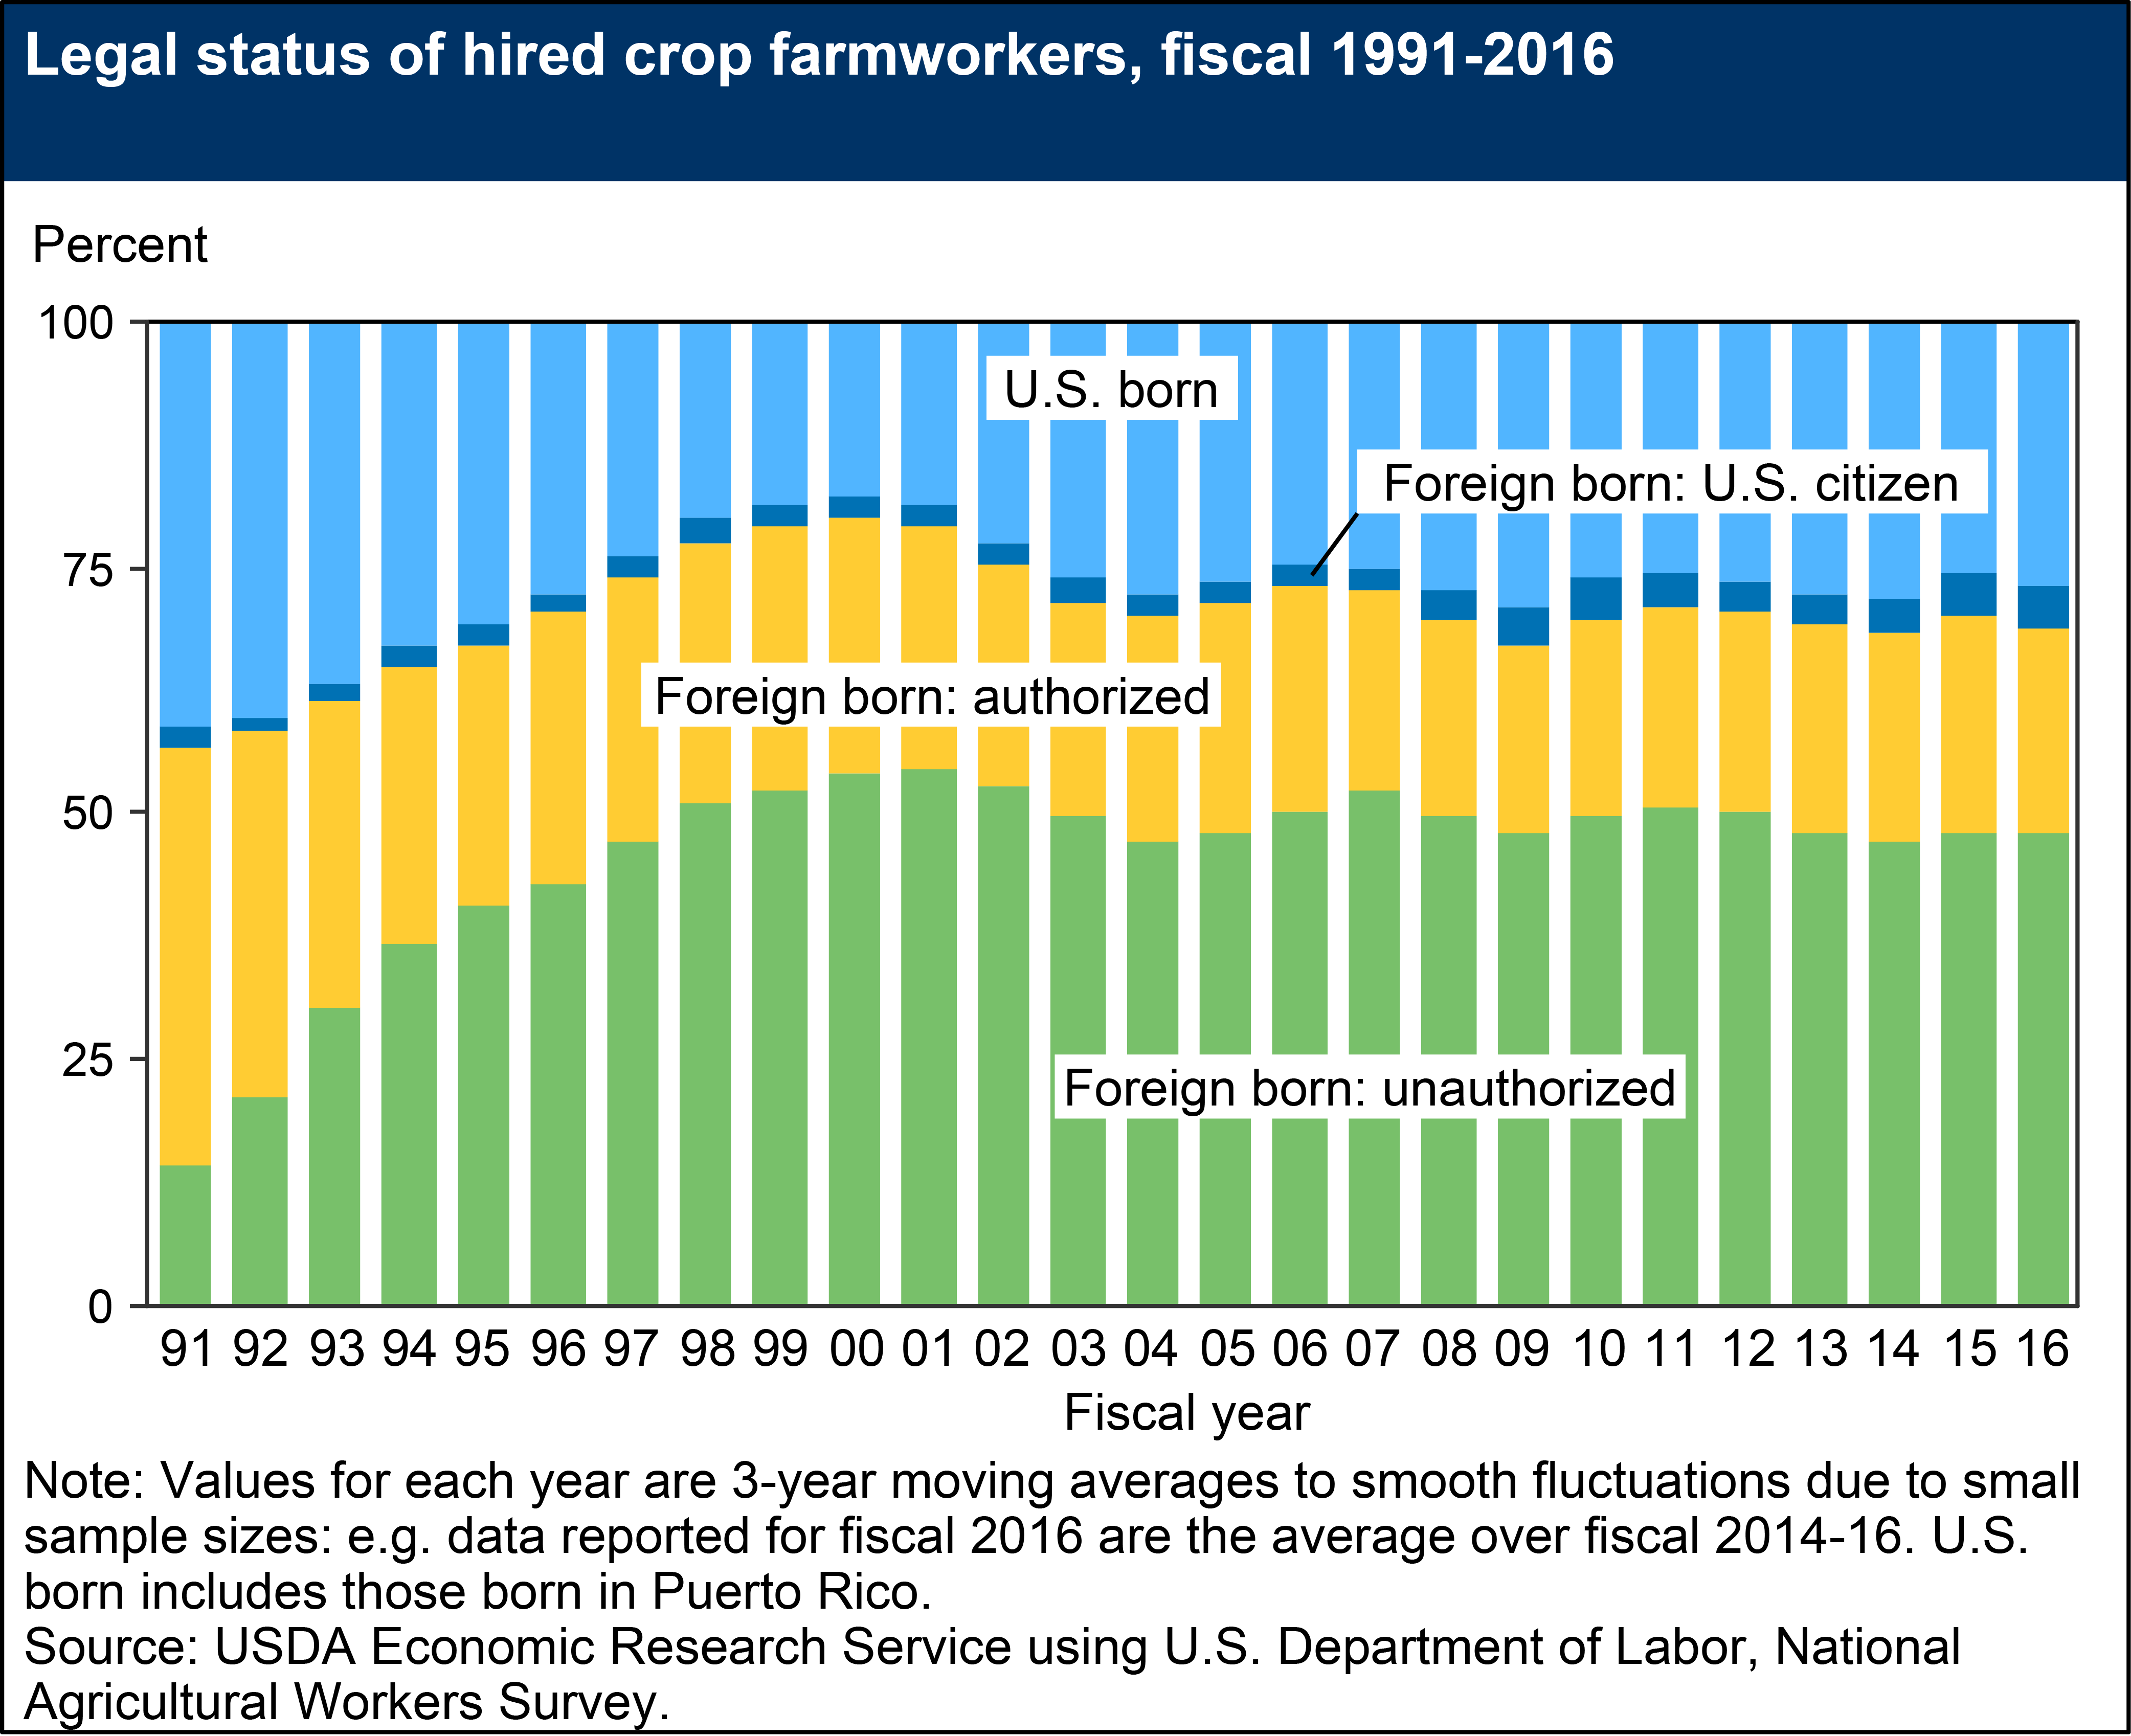 Graph of Legal Status of Hired Crop Farmworkers from fiscal year 1991 to 2016